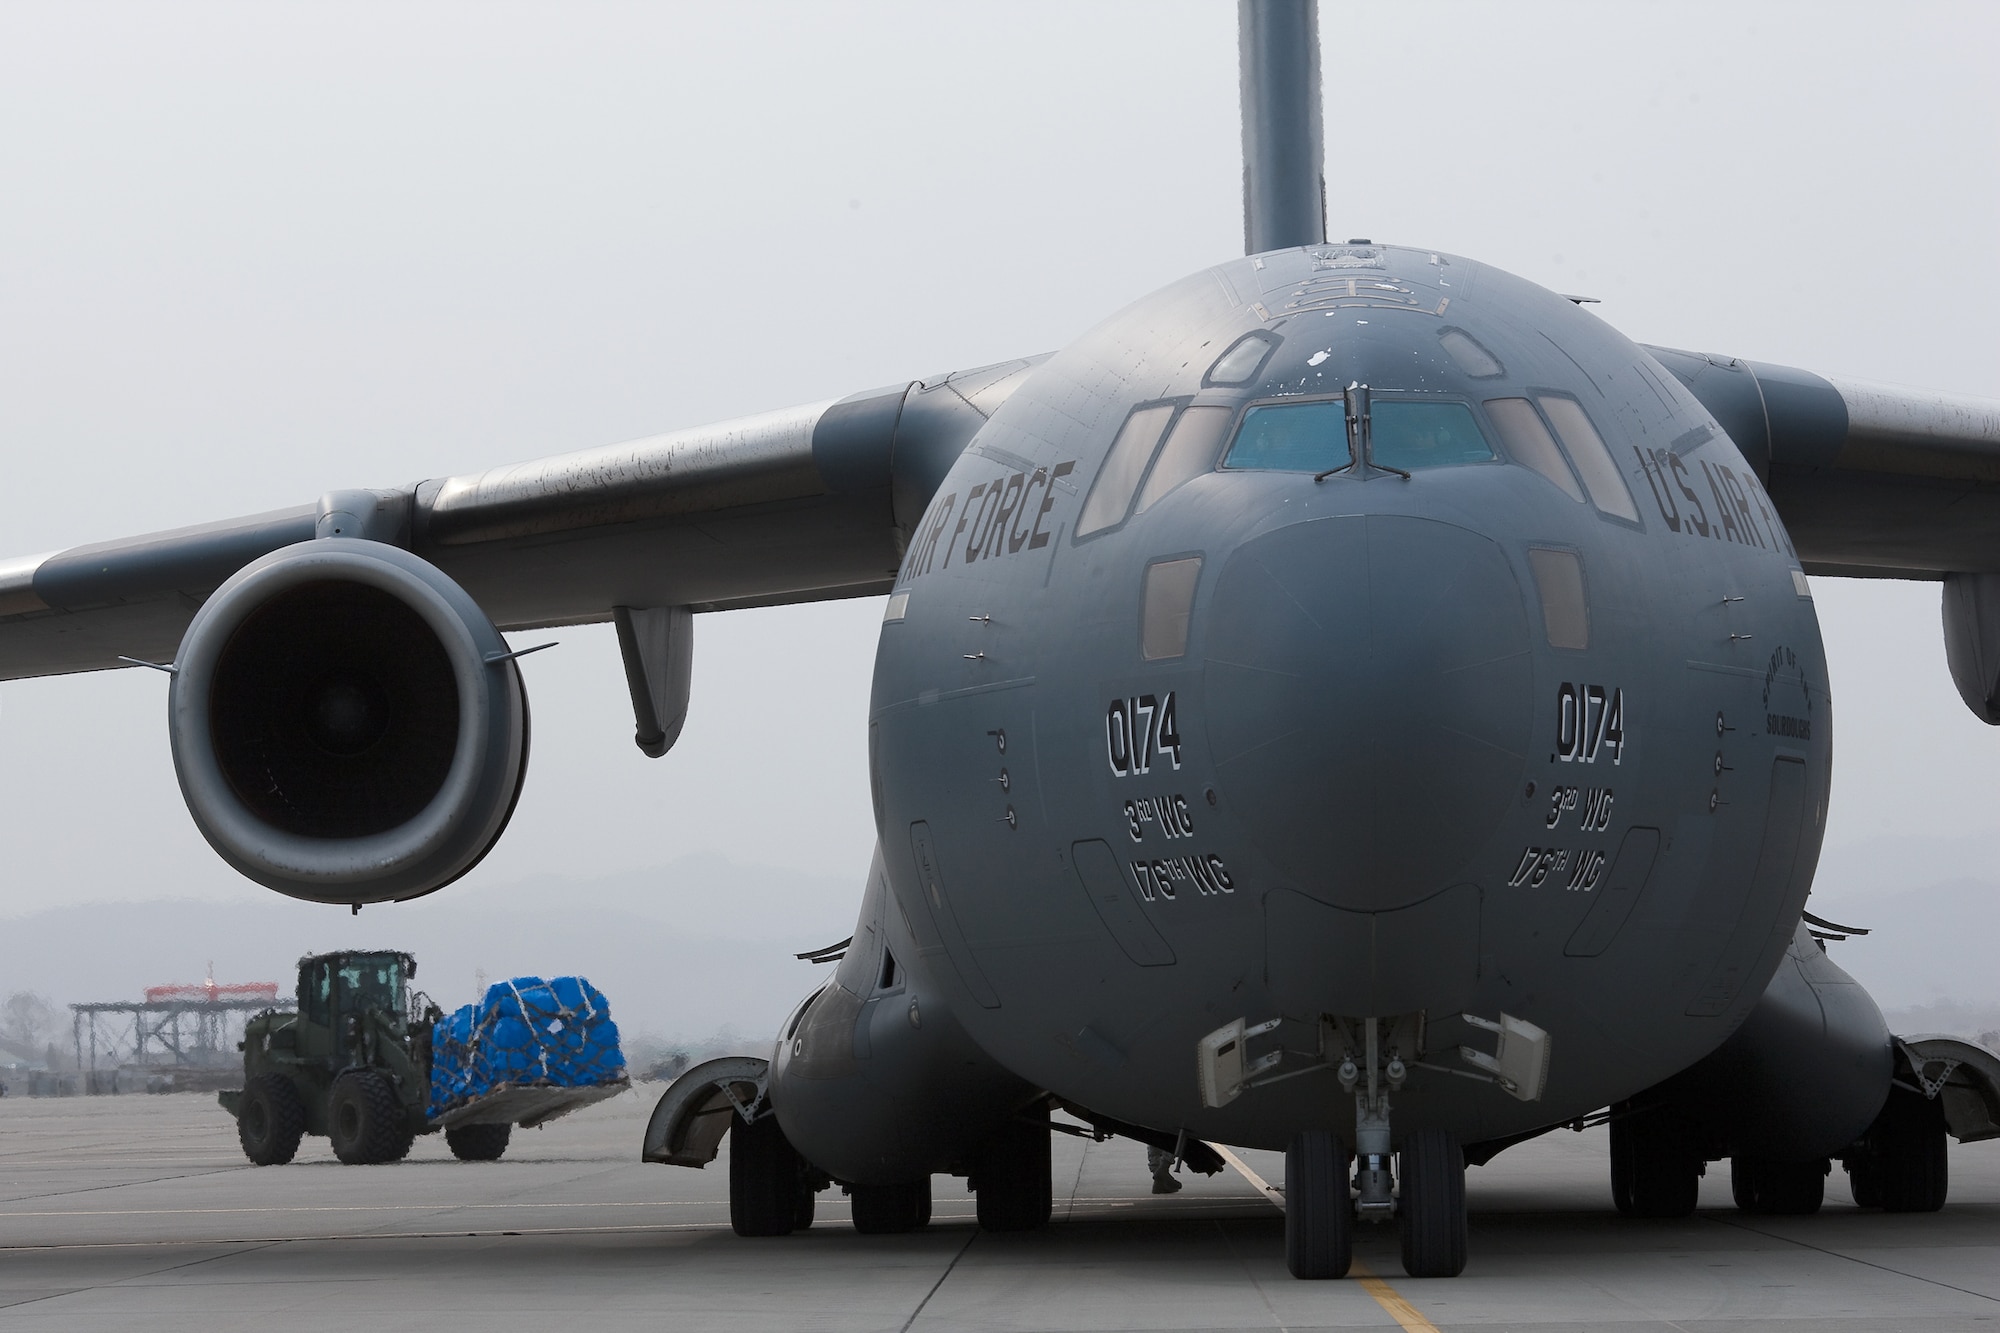 SENDAI AIRPORT, Japan -- Members of the 320th Special Tactics Squadron unload ten pallets of humanitarian relief supplies here March 20. The supplies were delivered by the first C-17 Globemaster III aircraft to land at the airport. (U.S. Air Force photo/Osakabe Yasuo) 